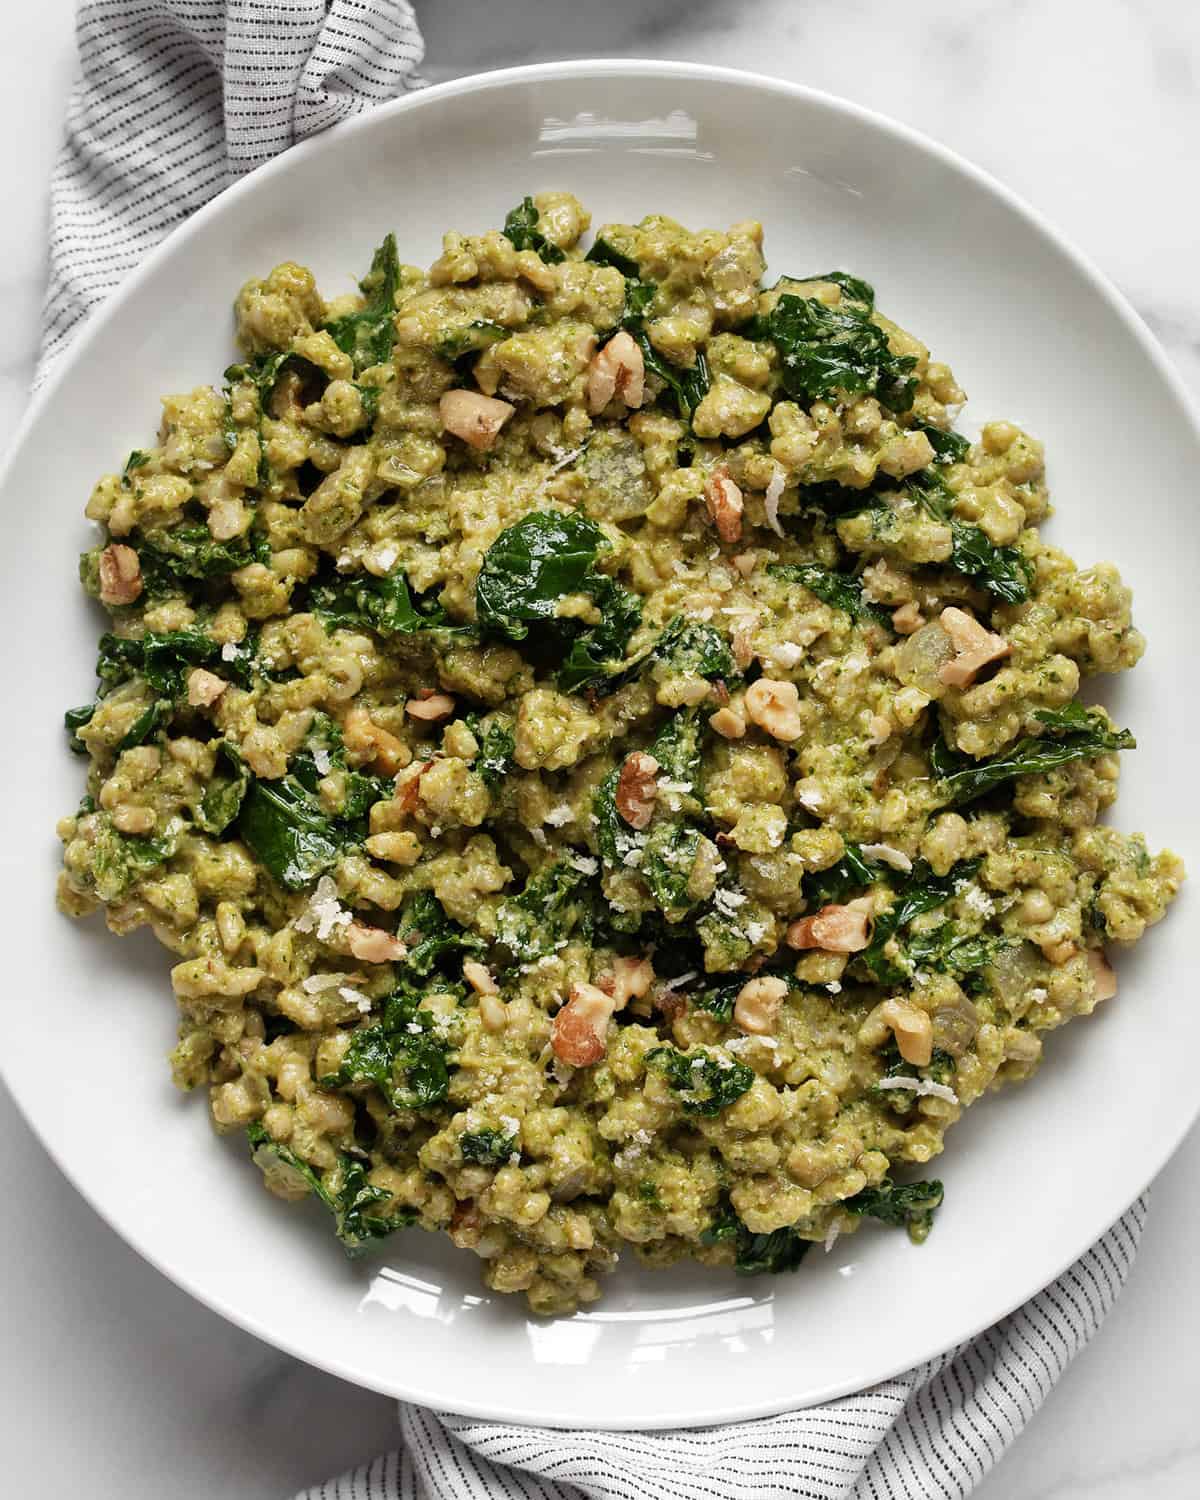 Baked kale barley risotto on a plate.